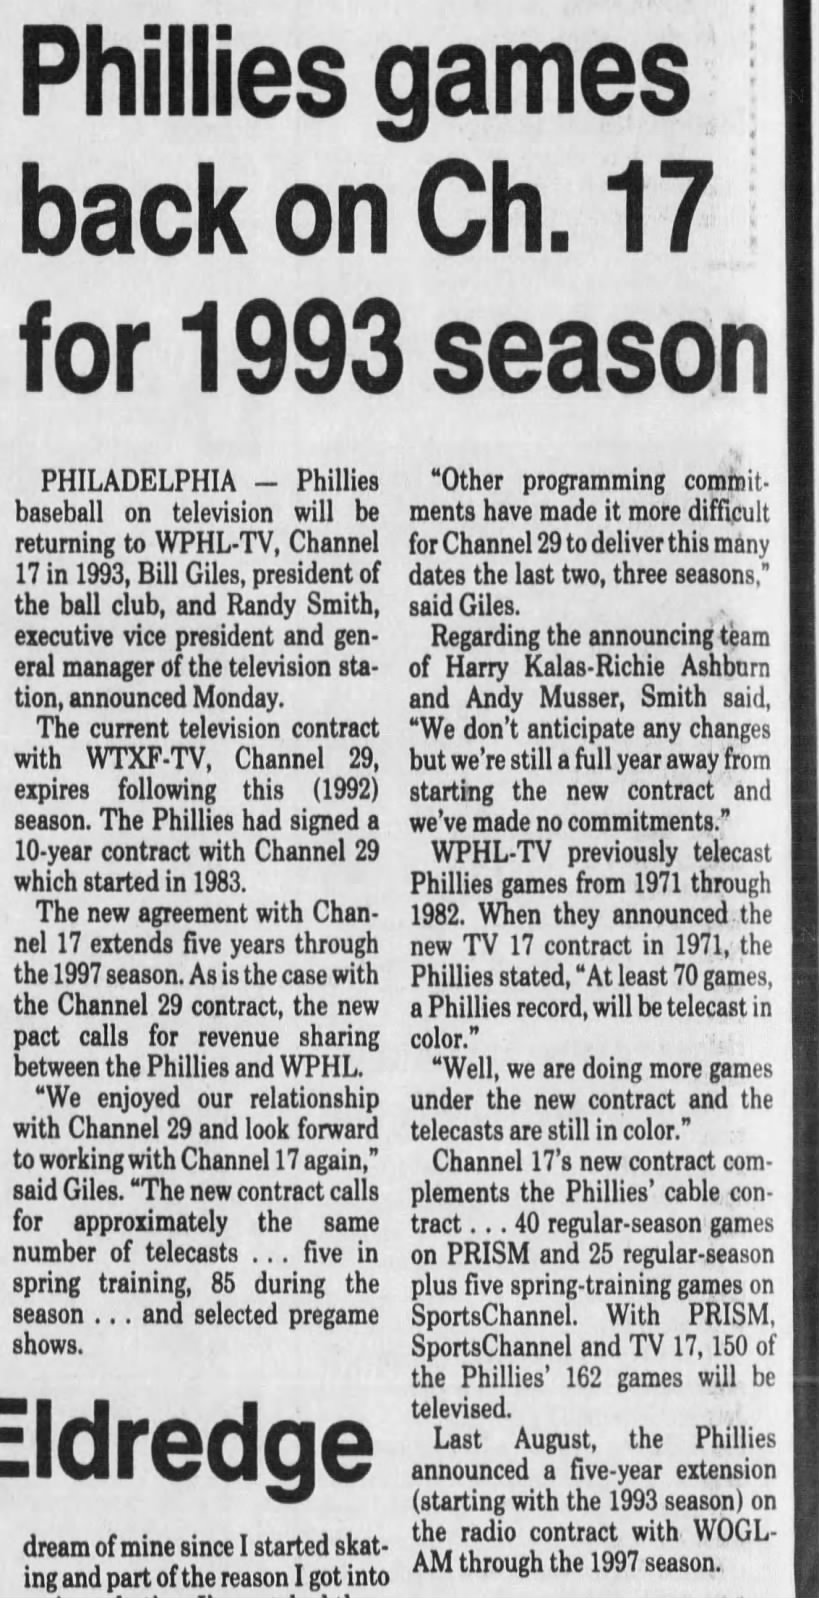 Phillies games back on Ch. 17 for 1993 season